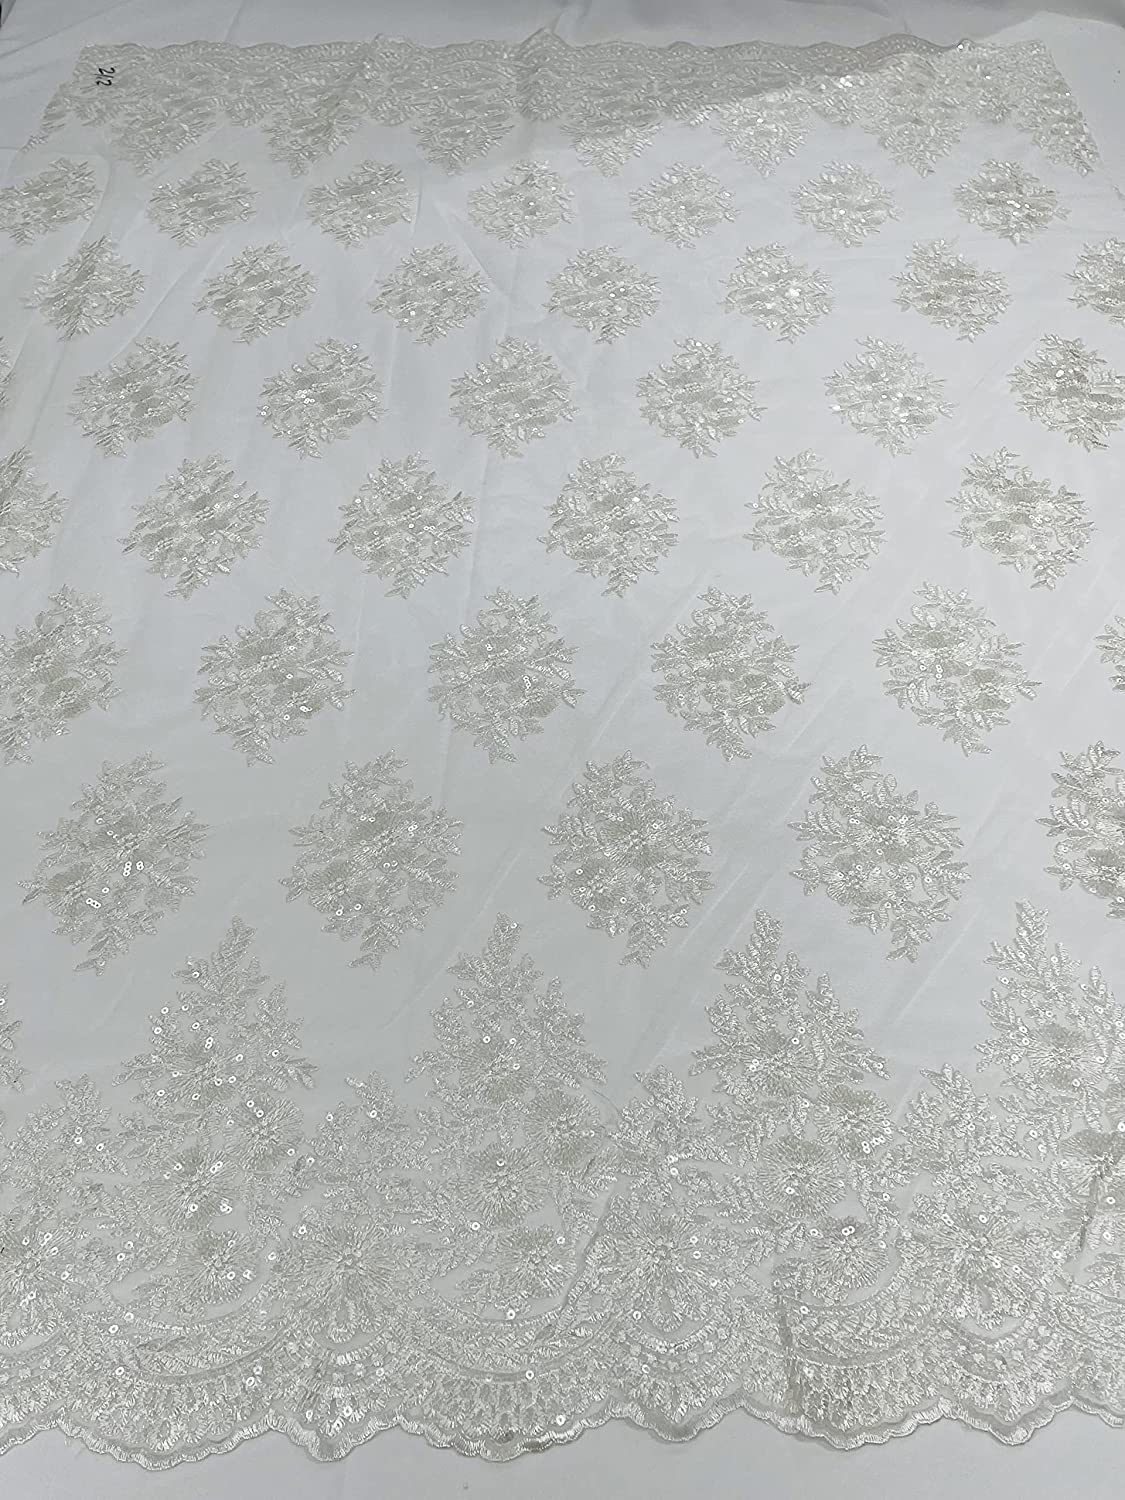 Emma Design Floral Corded Embroider with Sequins, Solid and with Glitter Mesh Lace Fabric (1 Yard, Solid Mesh Off White)